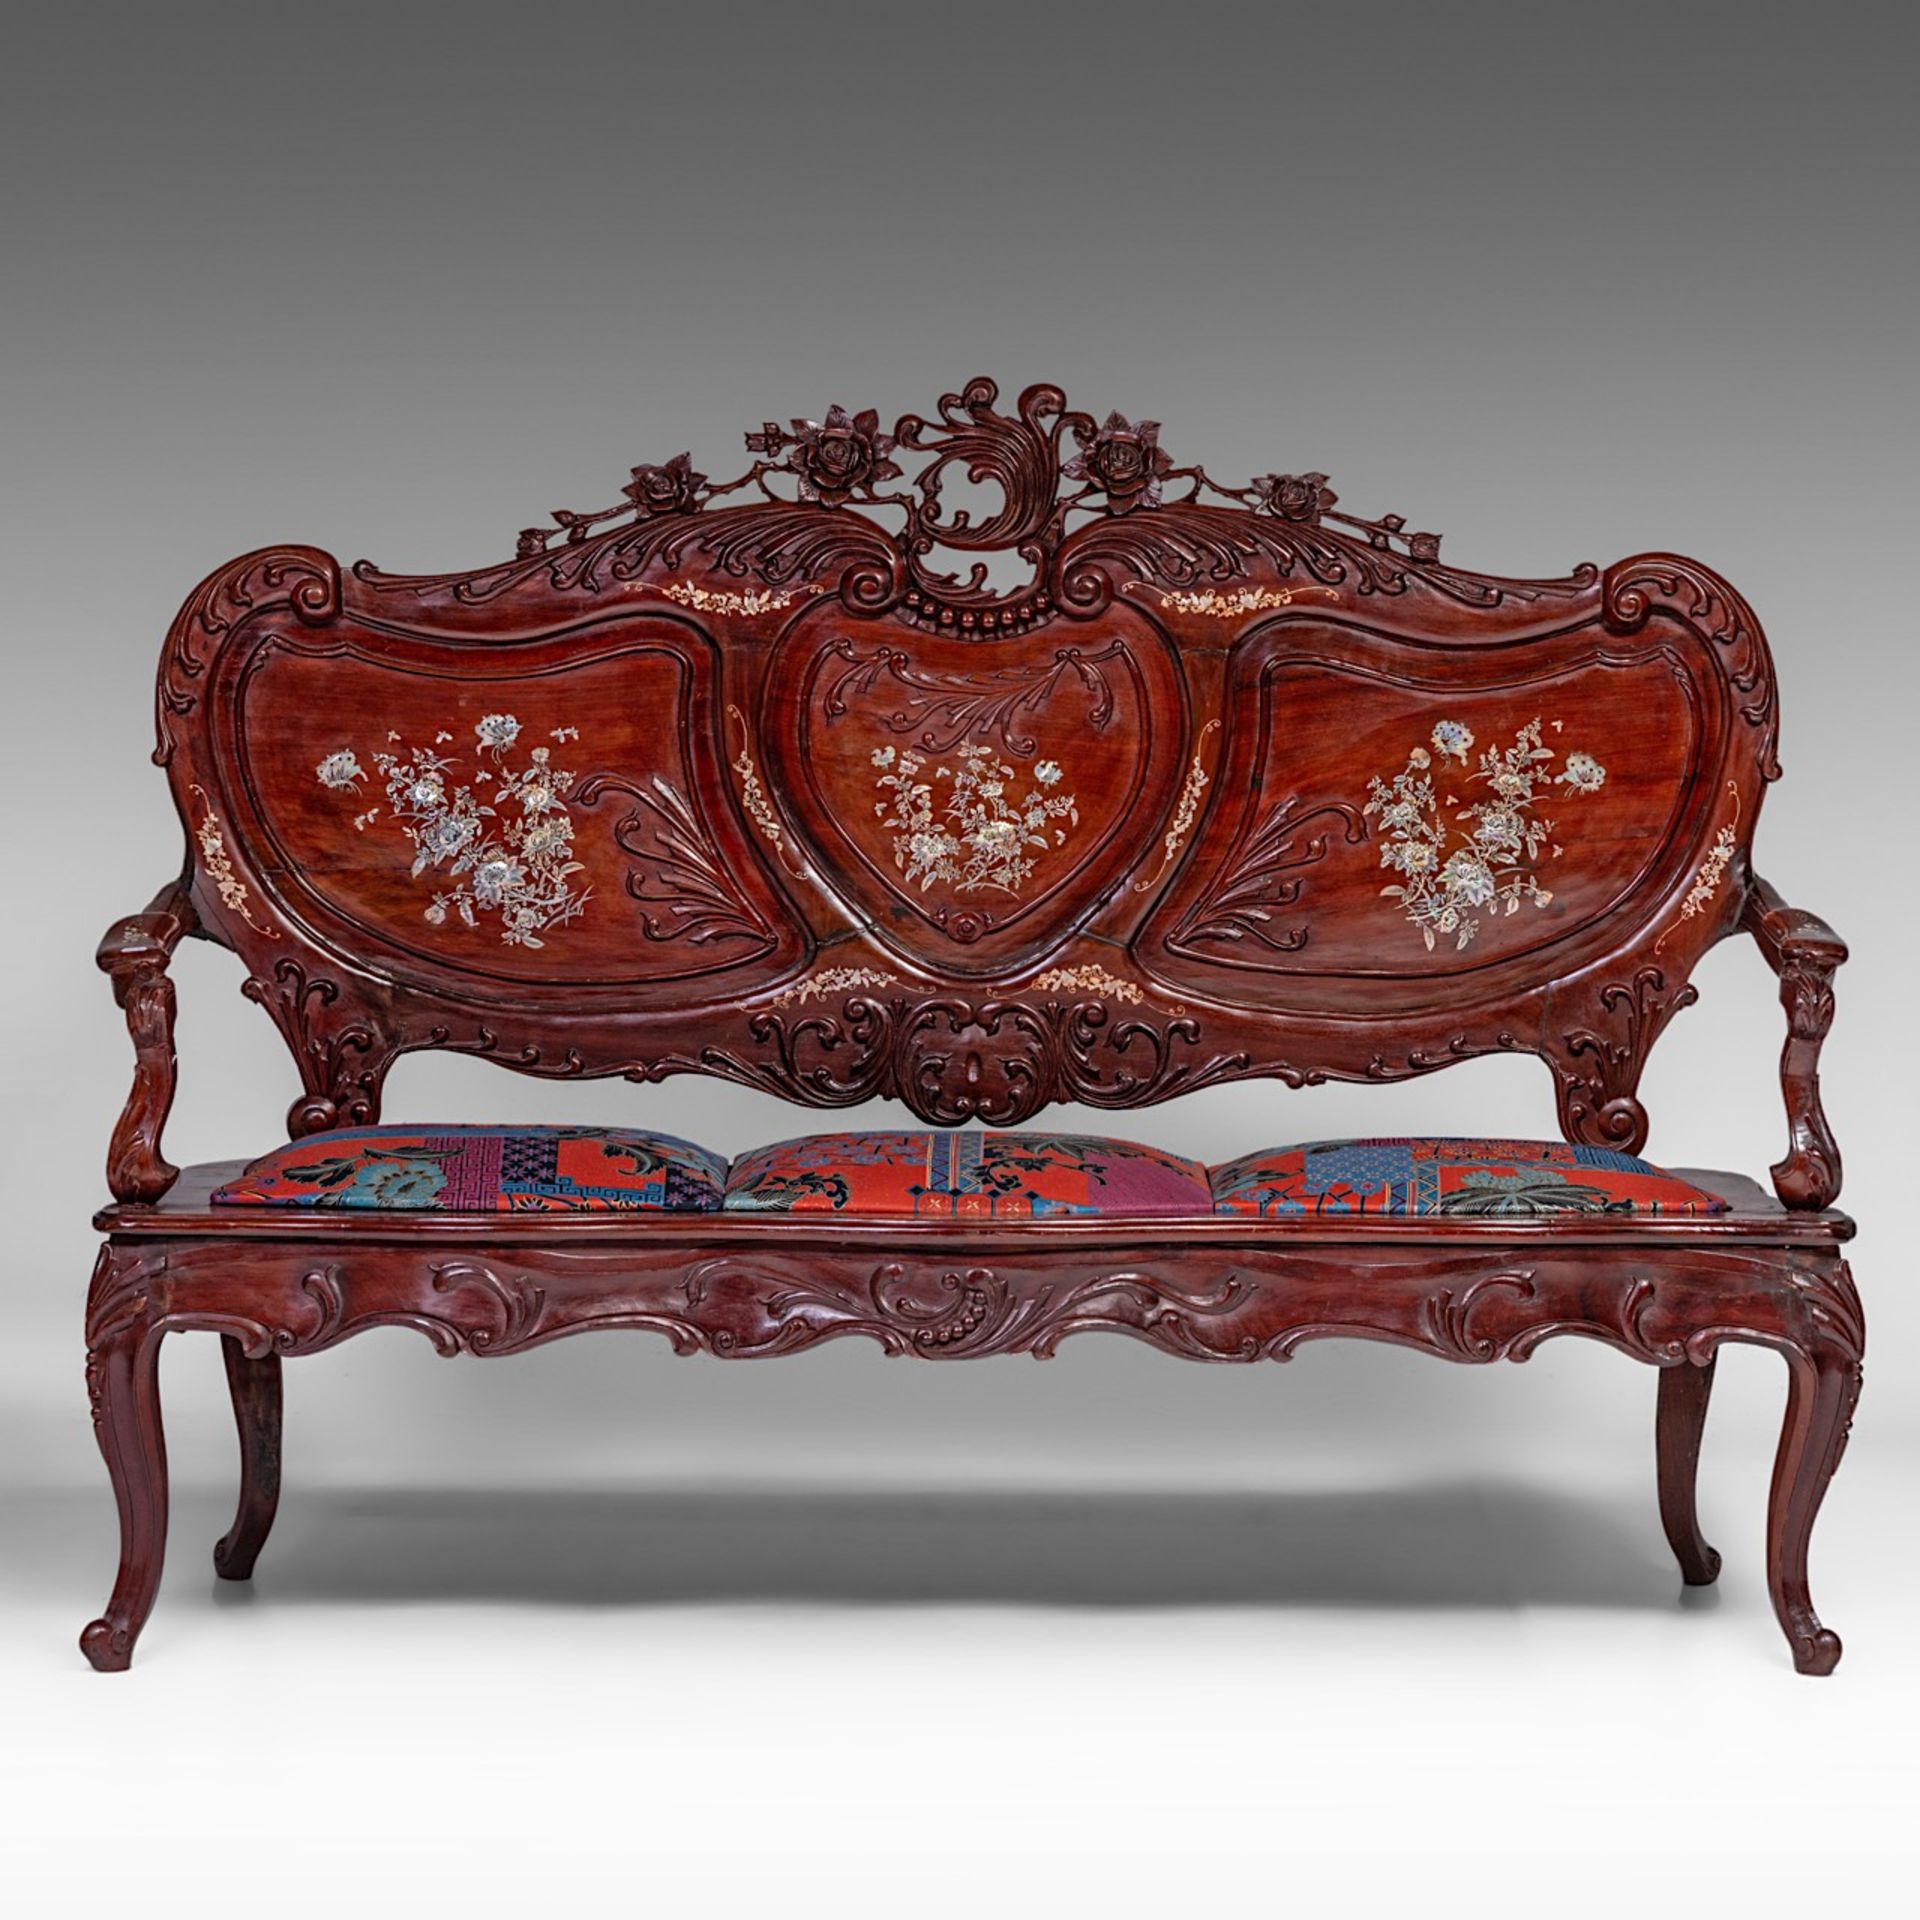 An Anglo-Chinese settee and two chairs, H settee 132 - H chair 108 cm - Image 14 of 24